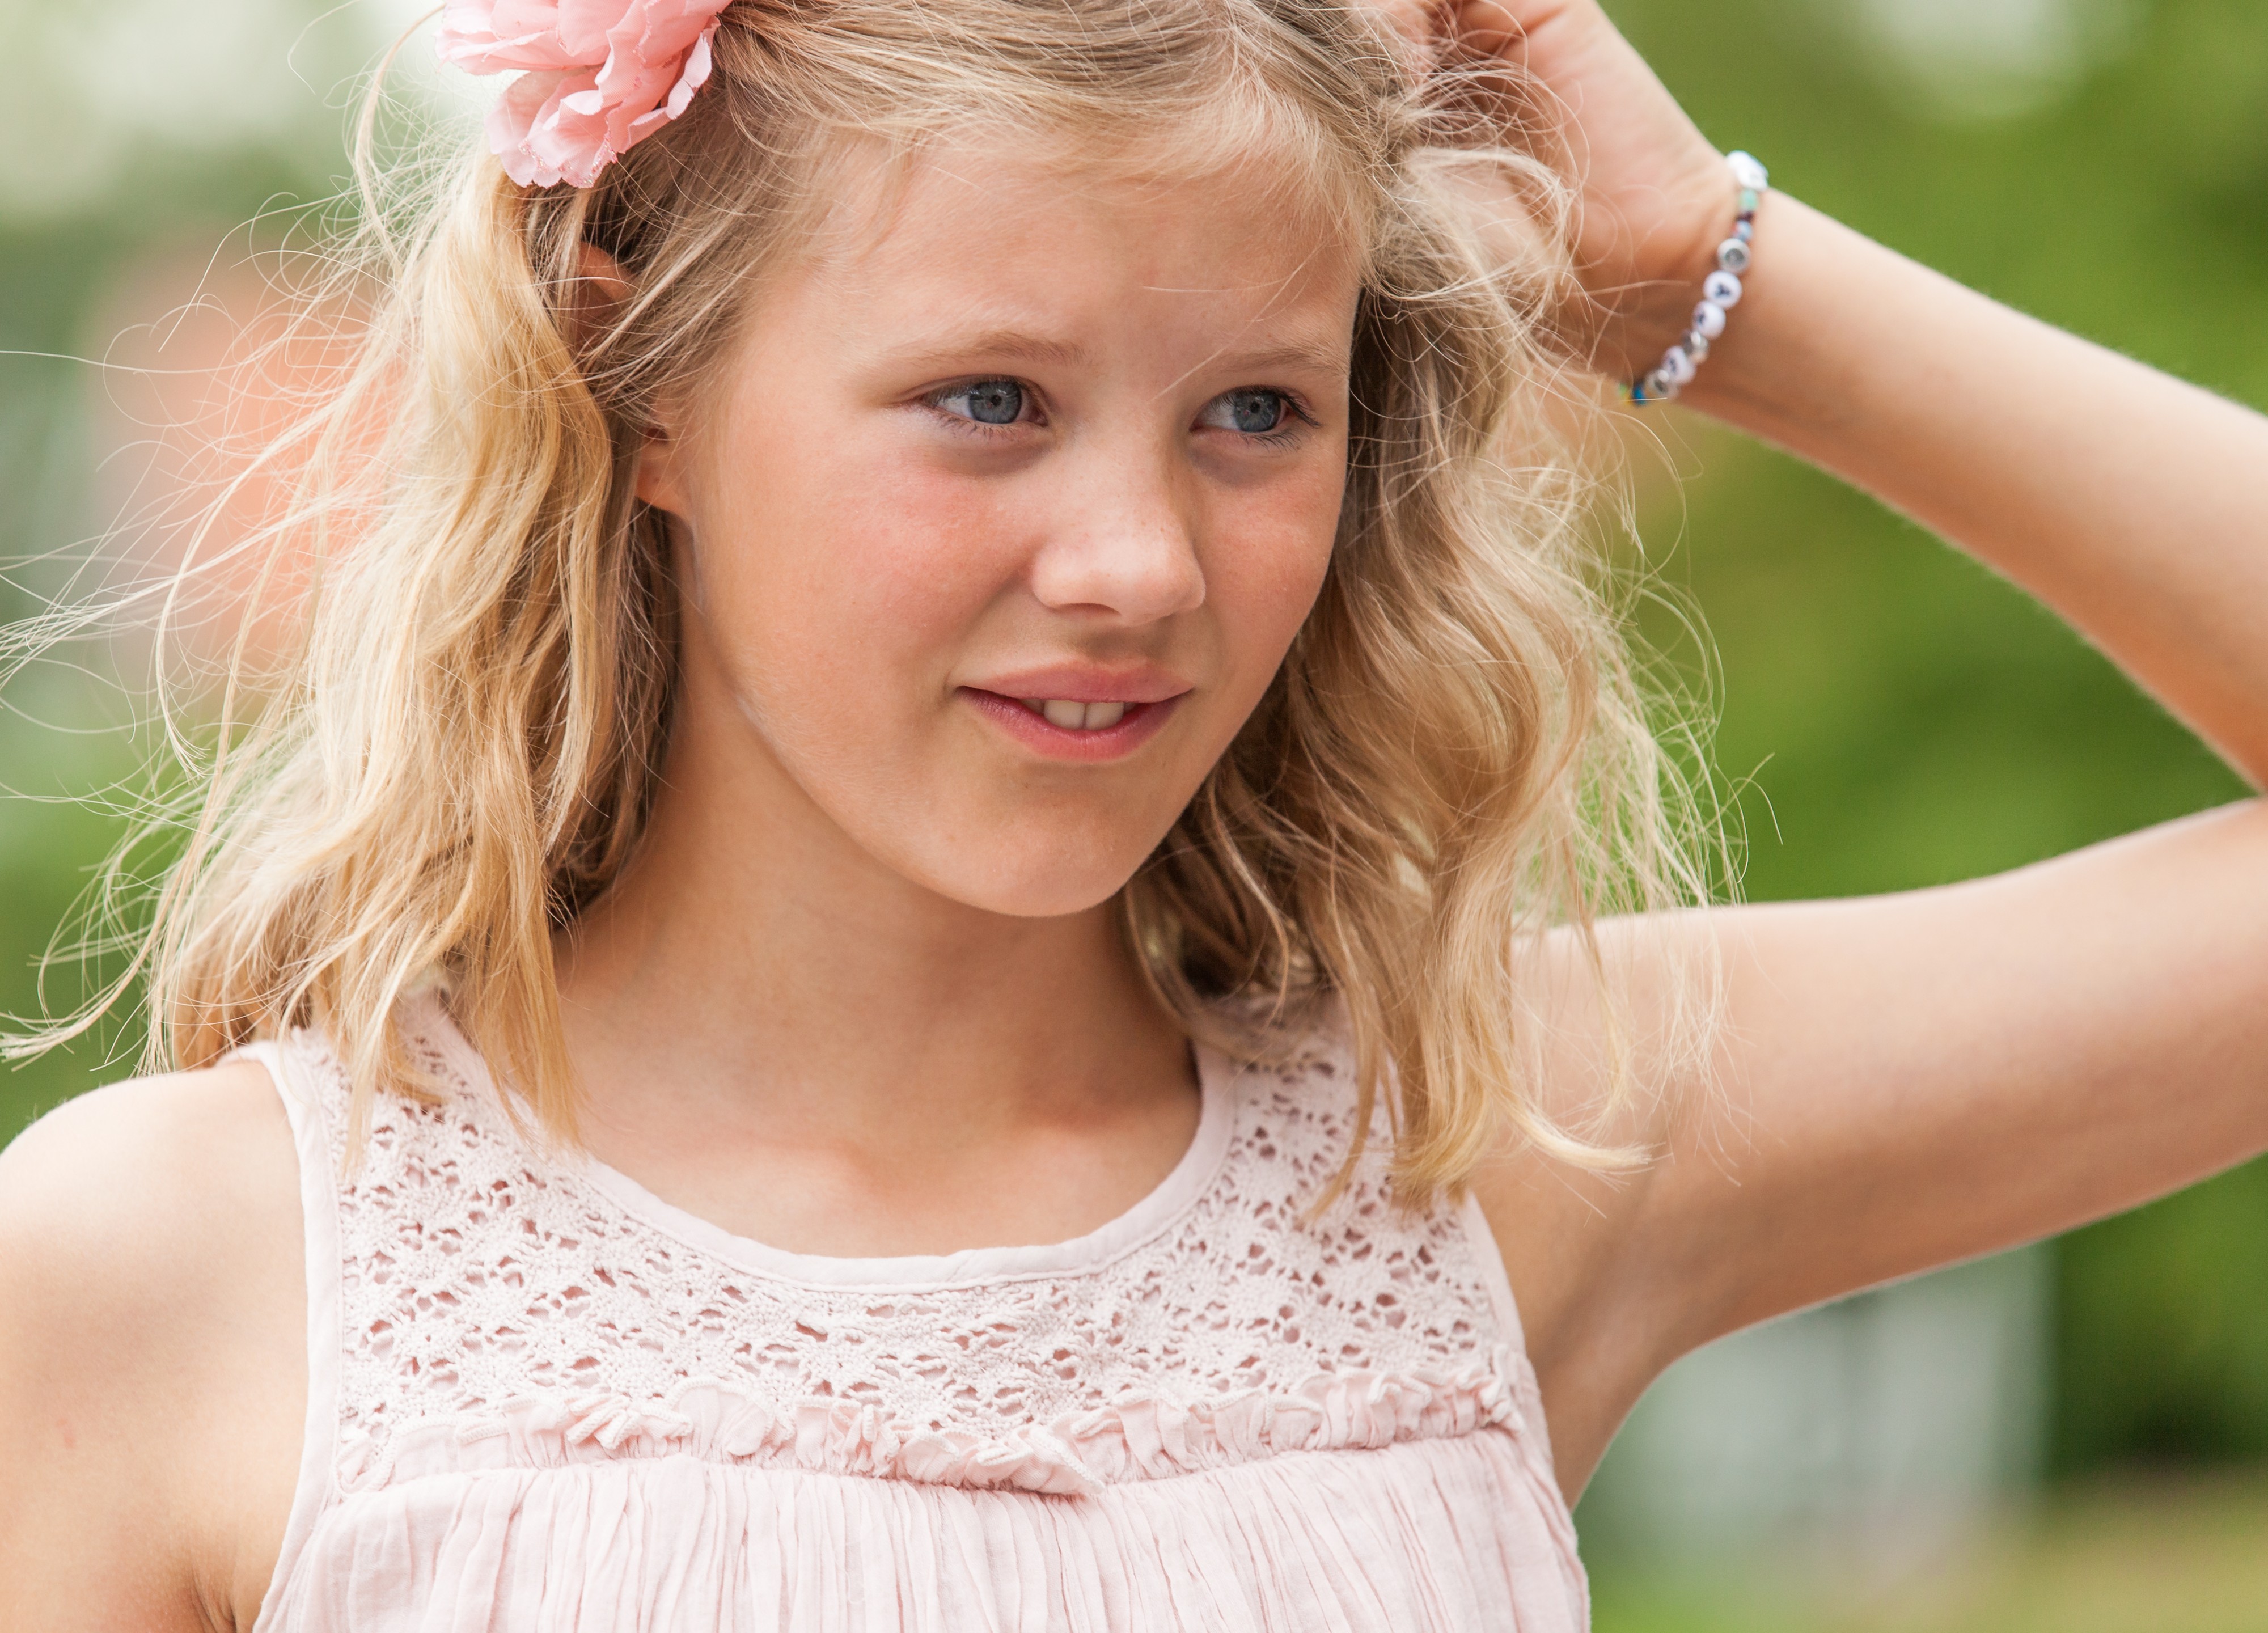 a blond beautiful girl photographed in Sigtuna, Sweden in June 2014, picture 8 out 20